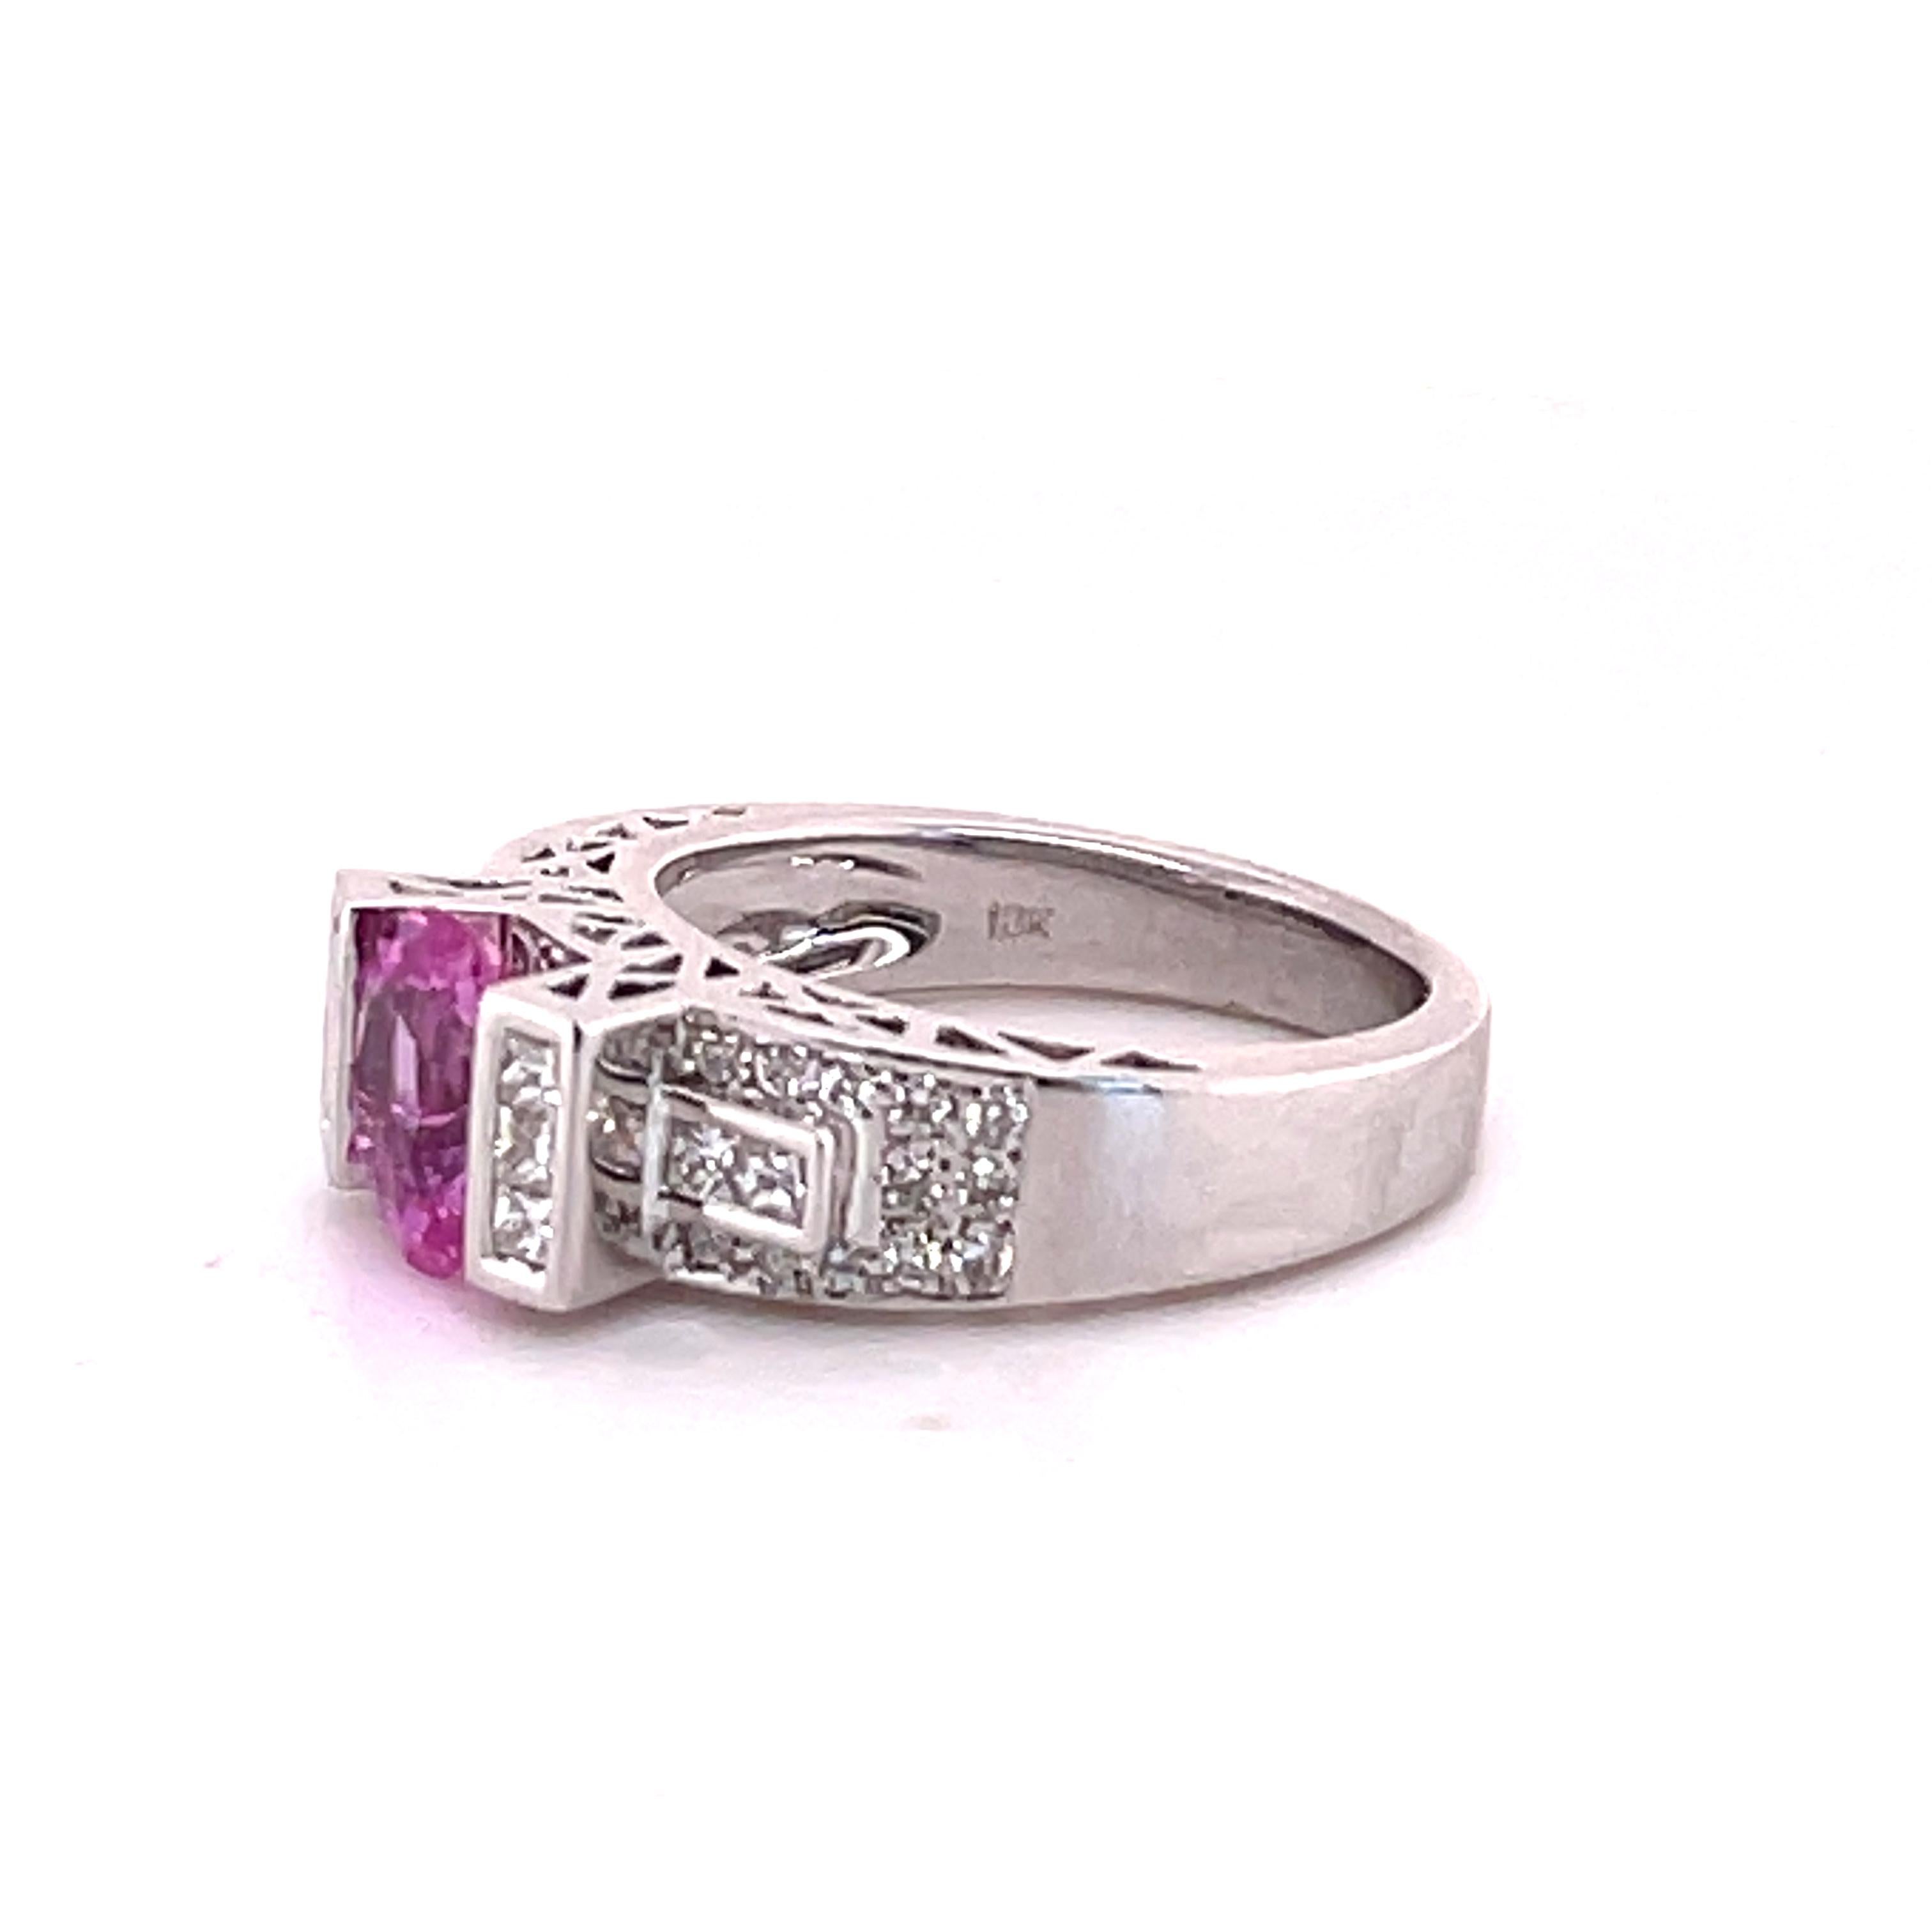 Sapphire is a wonderful gemstone to be worn daily, due to the Mohs' hardness of 9. This lovely oval light pink Sapphire is set in a unique modern setting that looks lovely on any hand. 
The ring is done in 18-karat white gold, stamped 750.
The 10